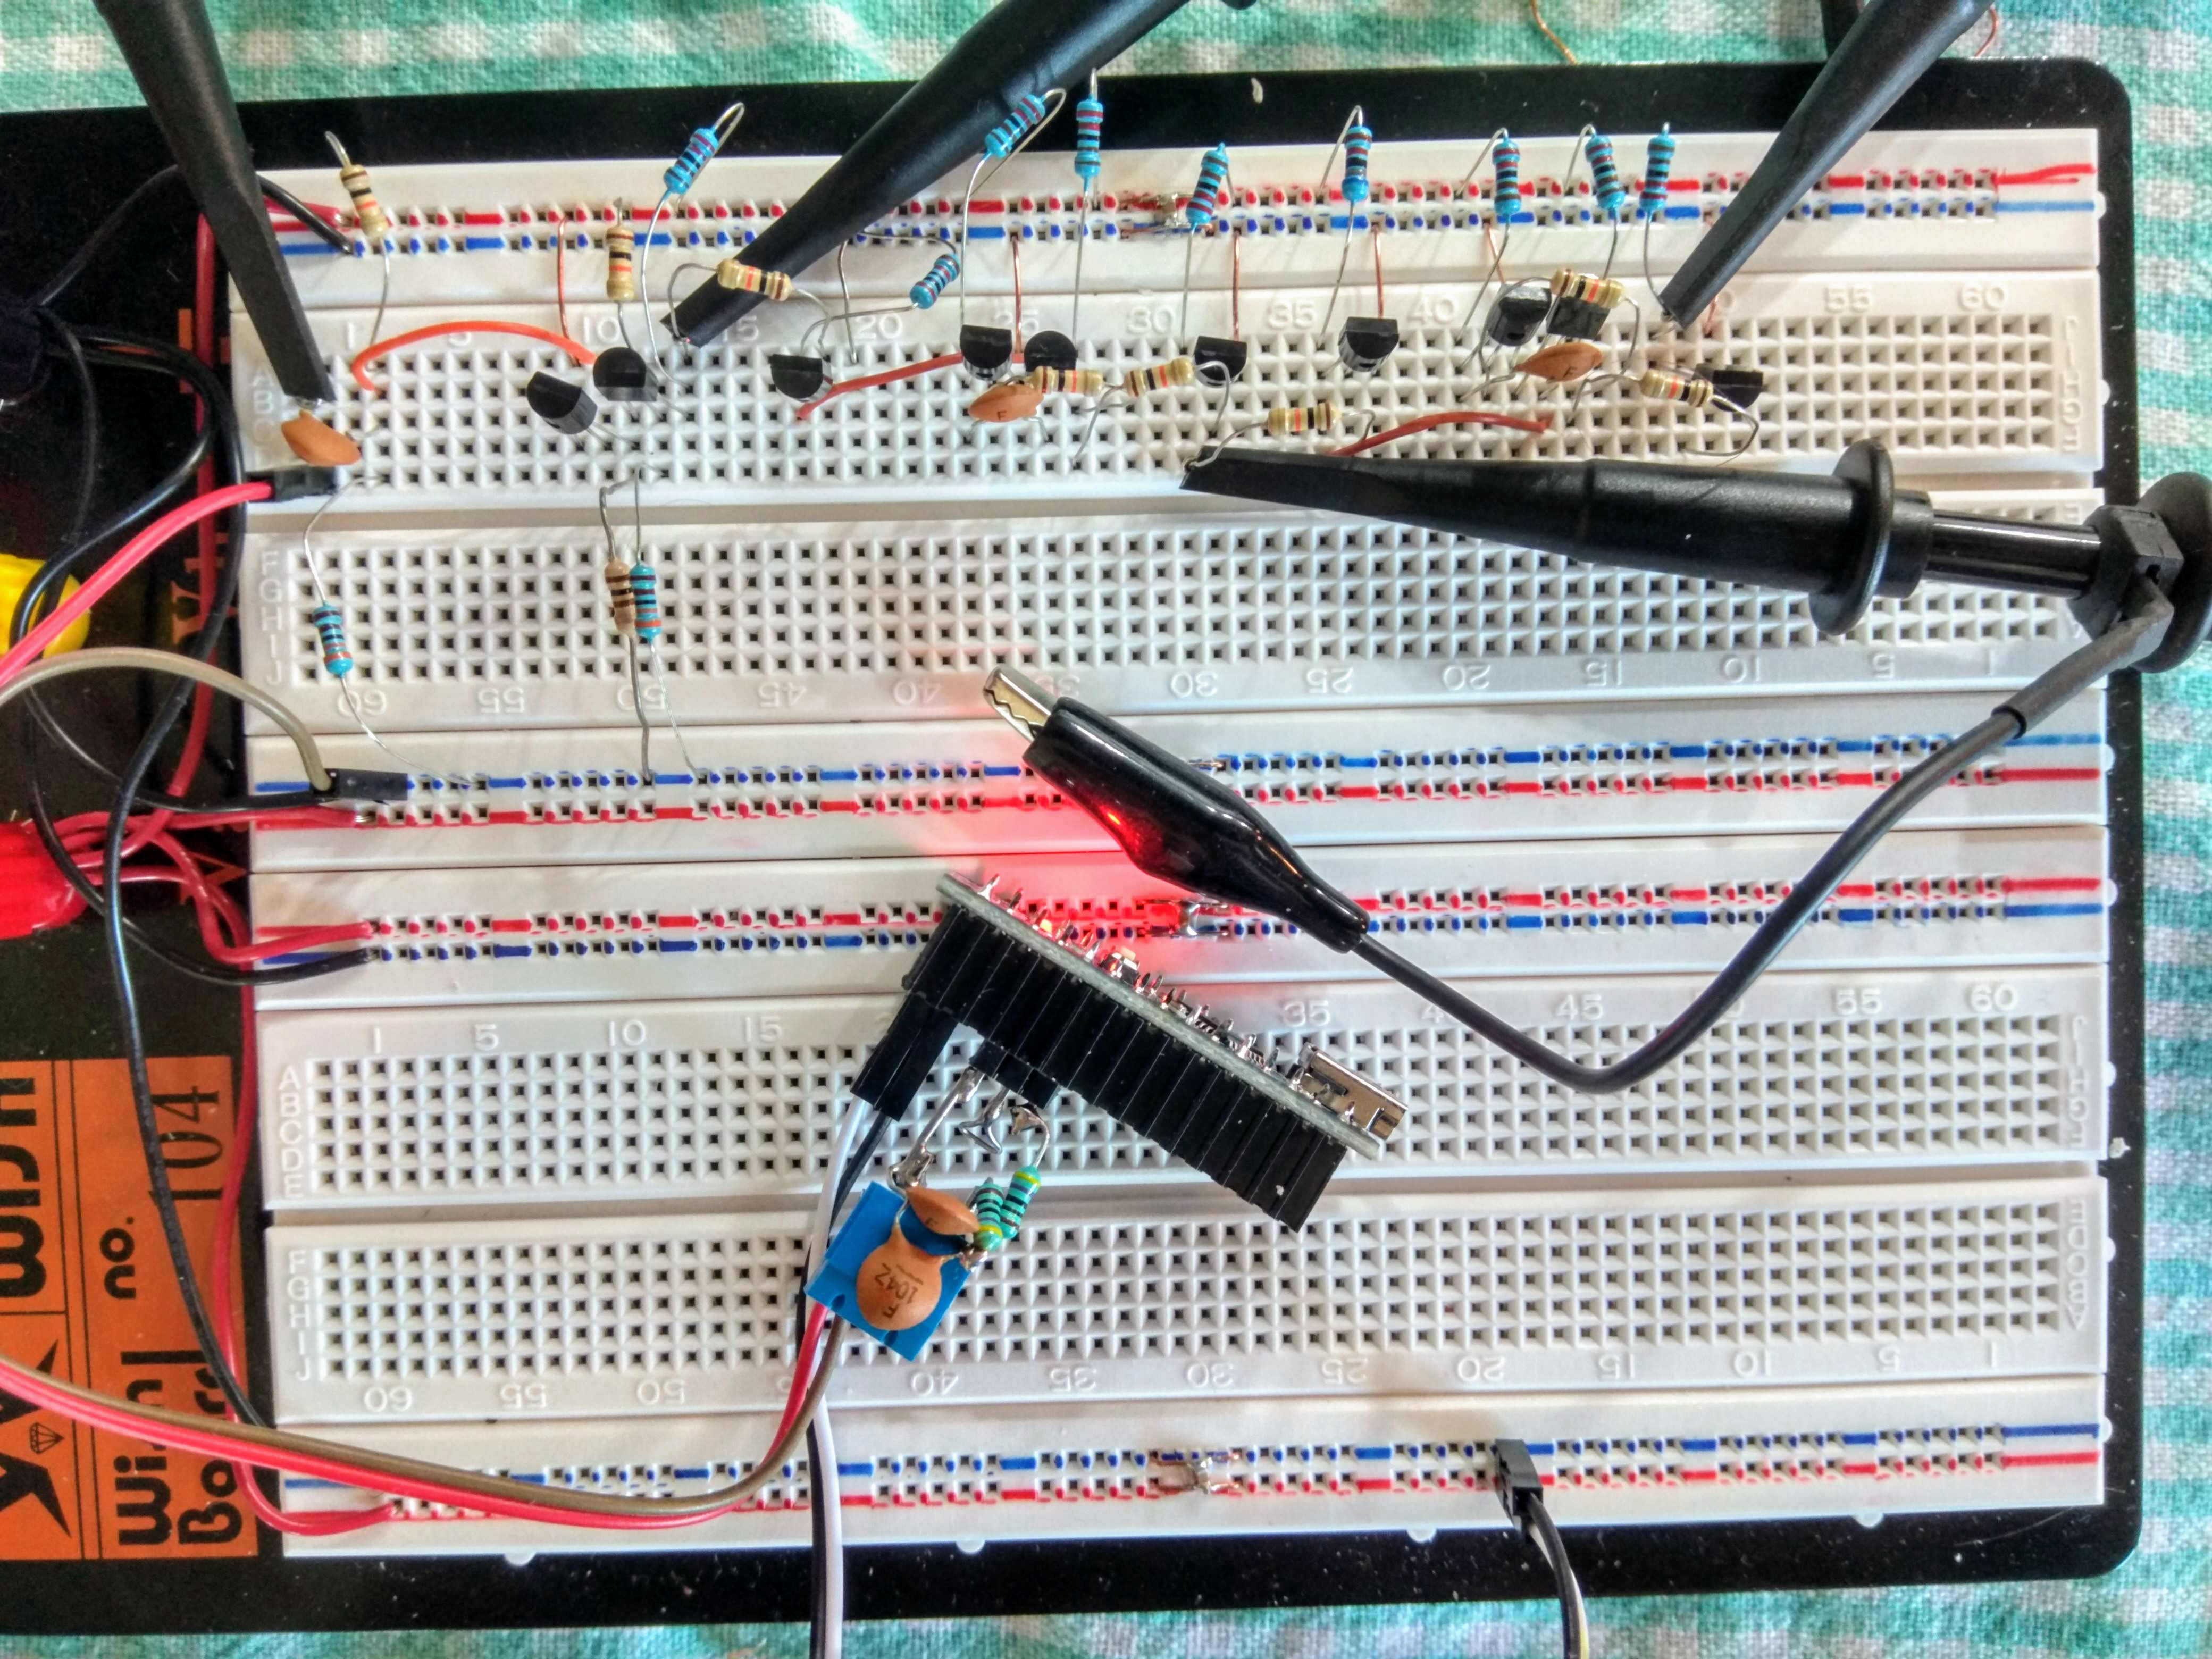 Breadboard of the Audio-to-Serial converter